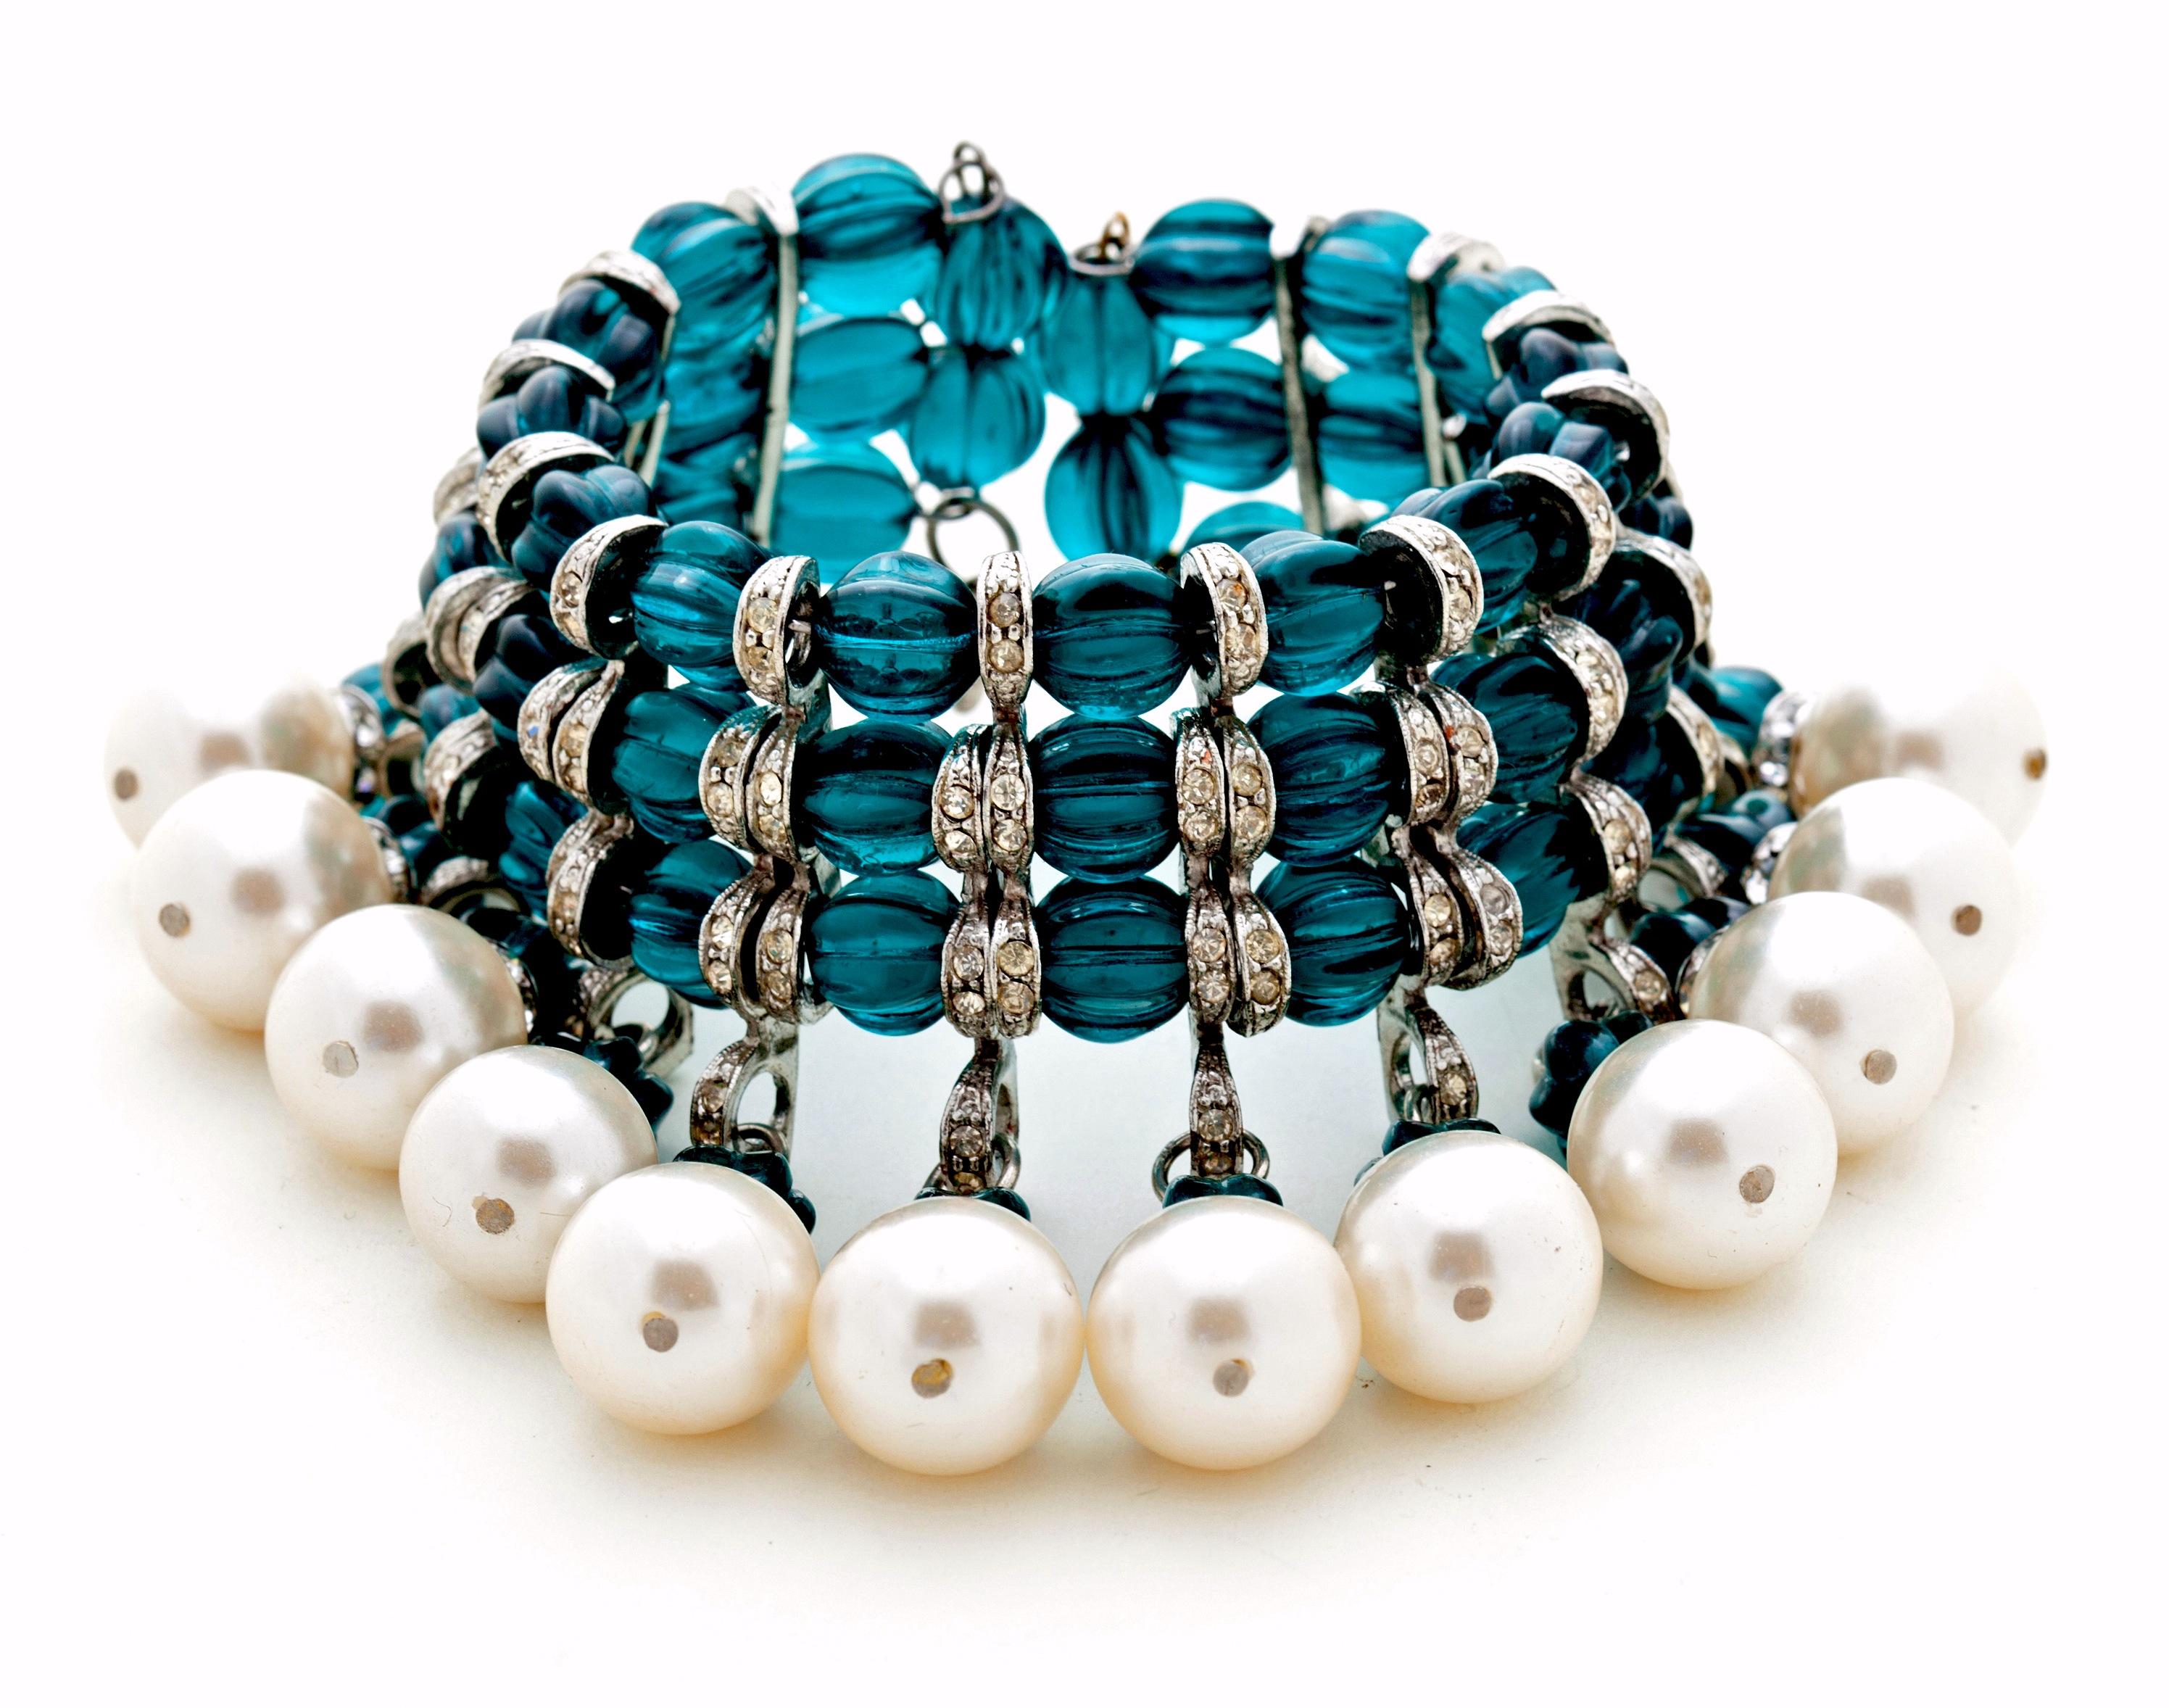 Stunning runway bracelet with great movement and fantastic green teal glass beads, chunky faux pearls and crystals.  This super chic bracelet can fit a variety of wrists since it wraps and can fit a small or larger wrist.  Great jingle jangle and